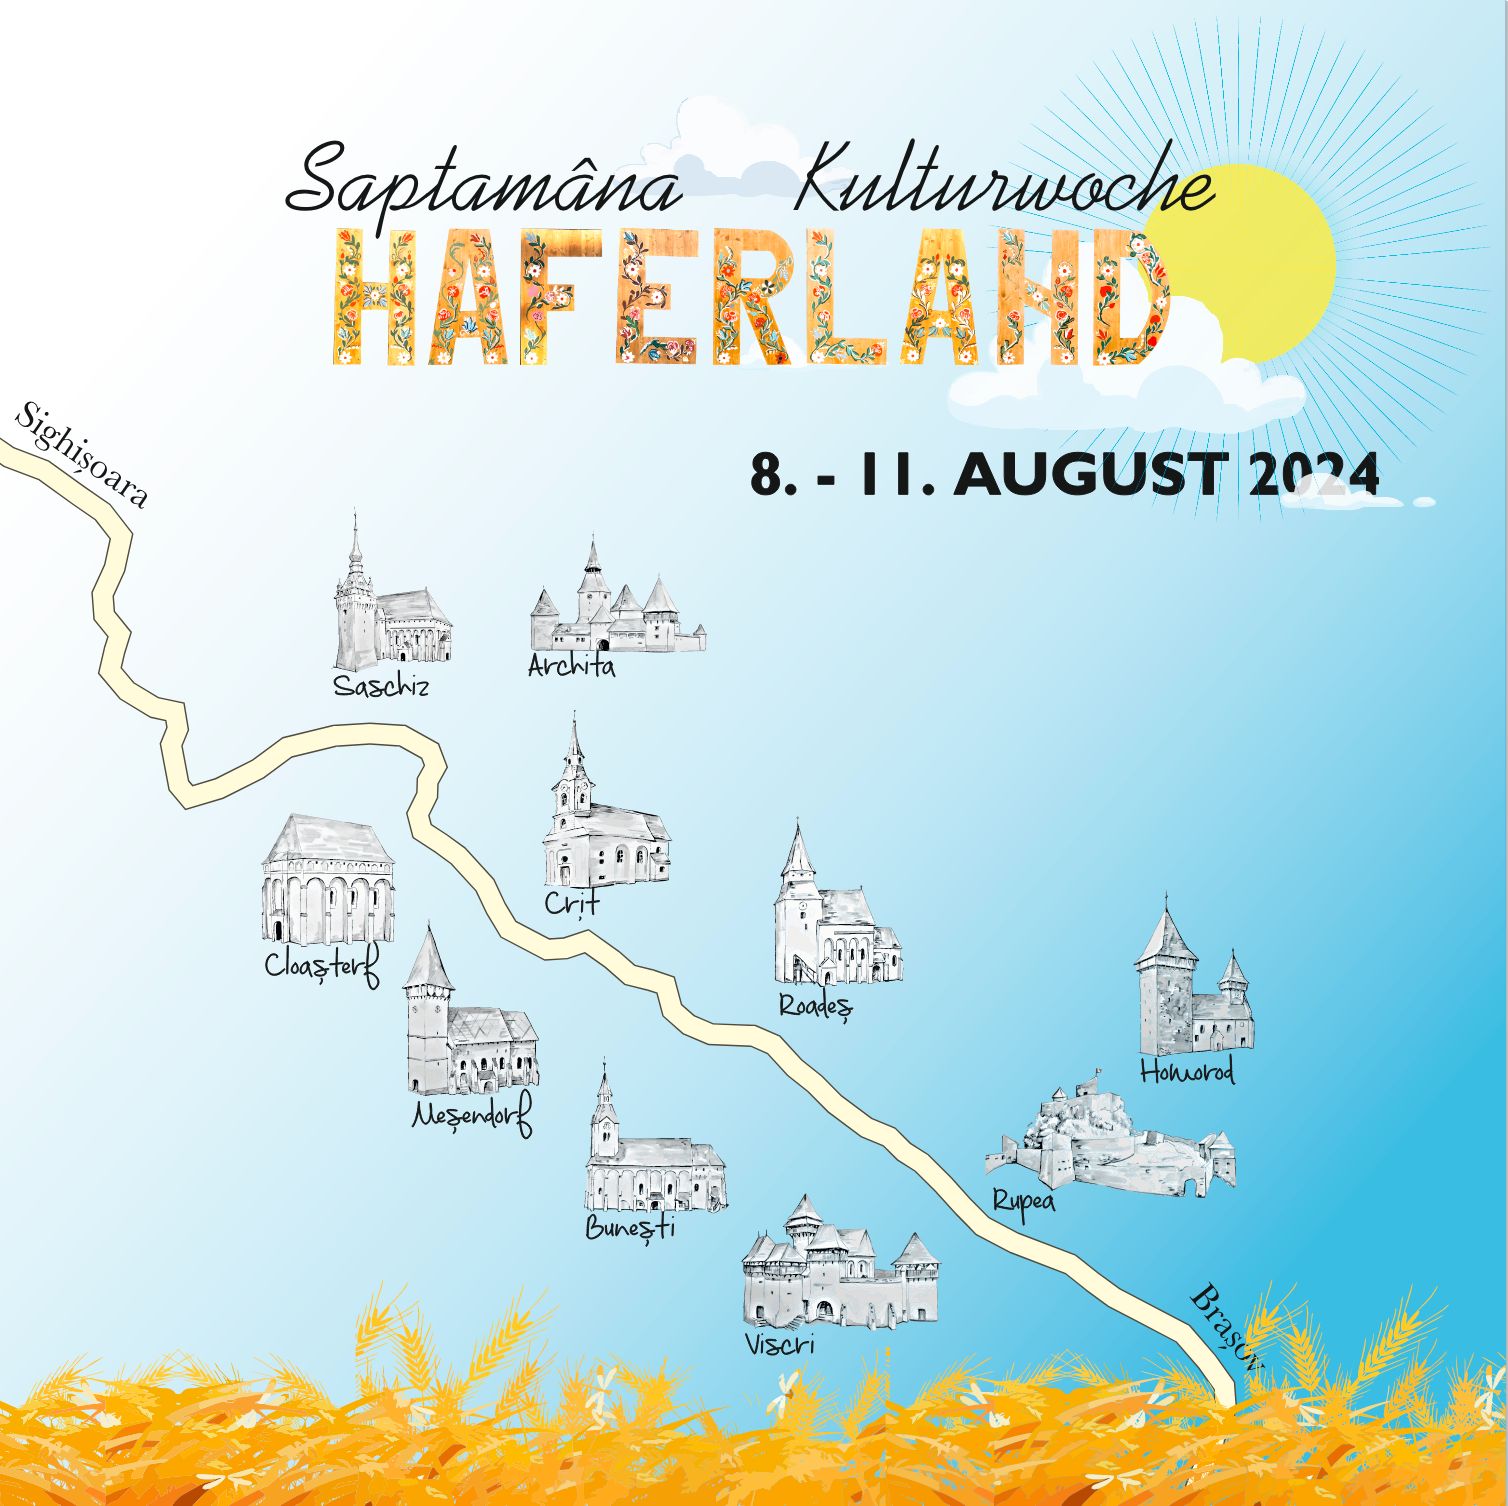 Haferland Week to celebrate Saxons in Romania’s Transylvania in August